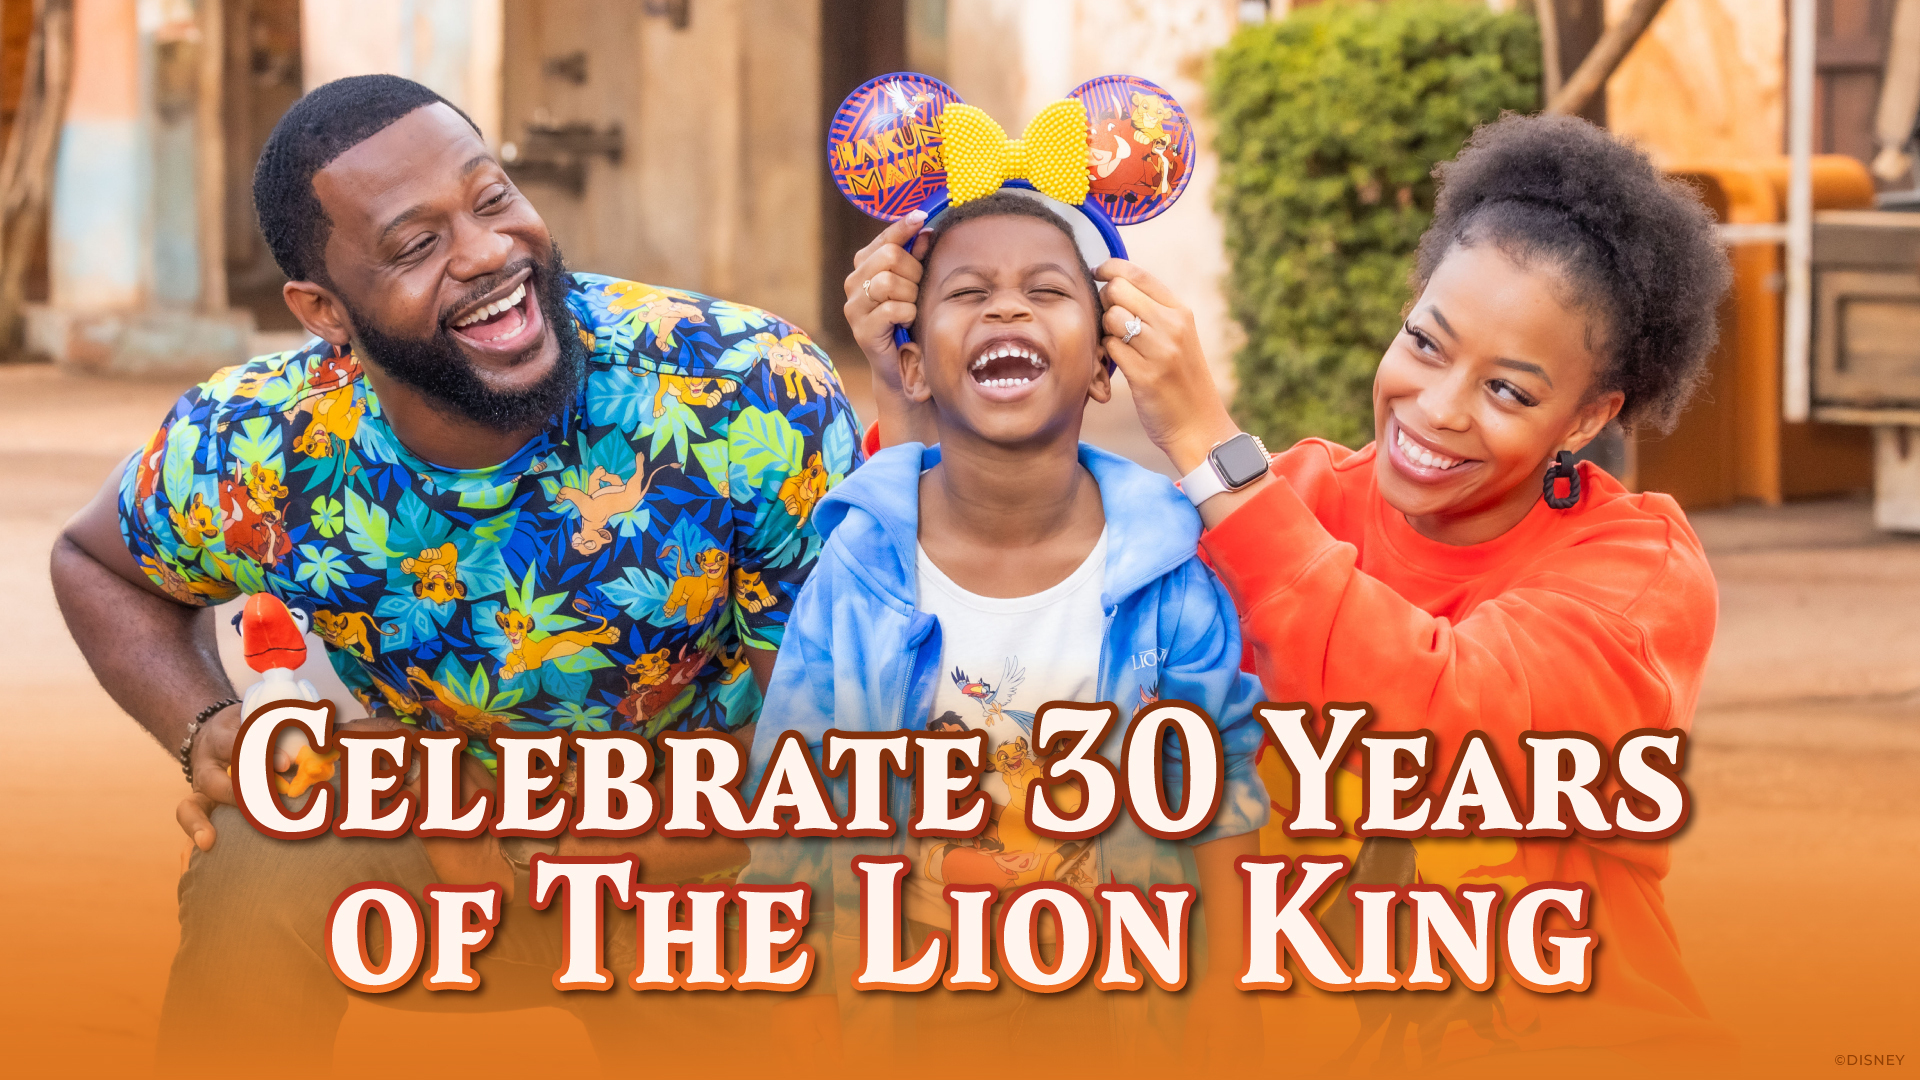 Celebrate 30 Years of The Lion King